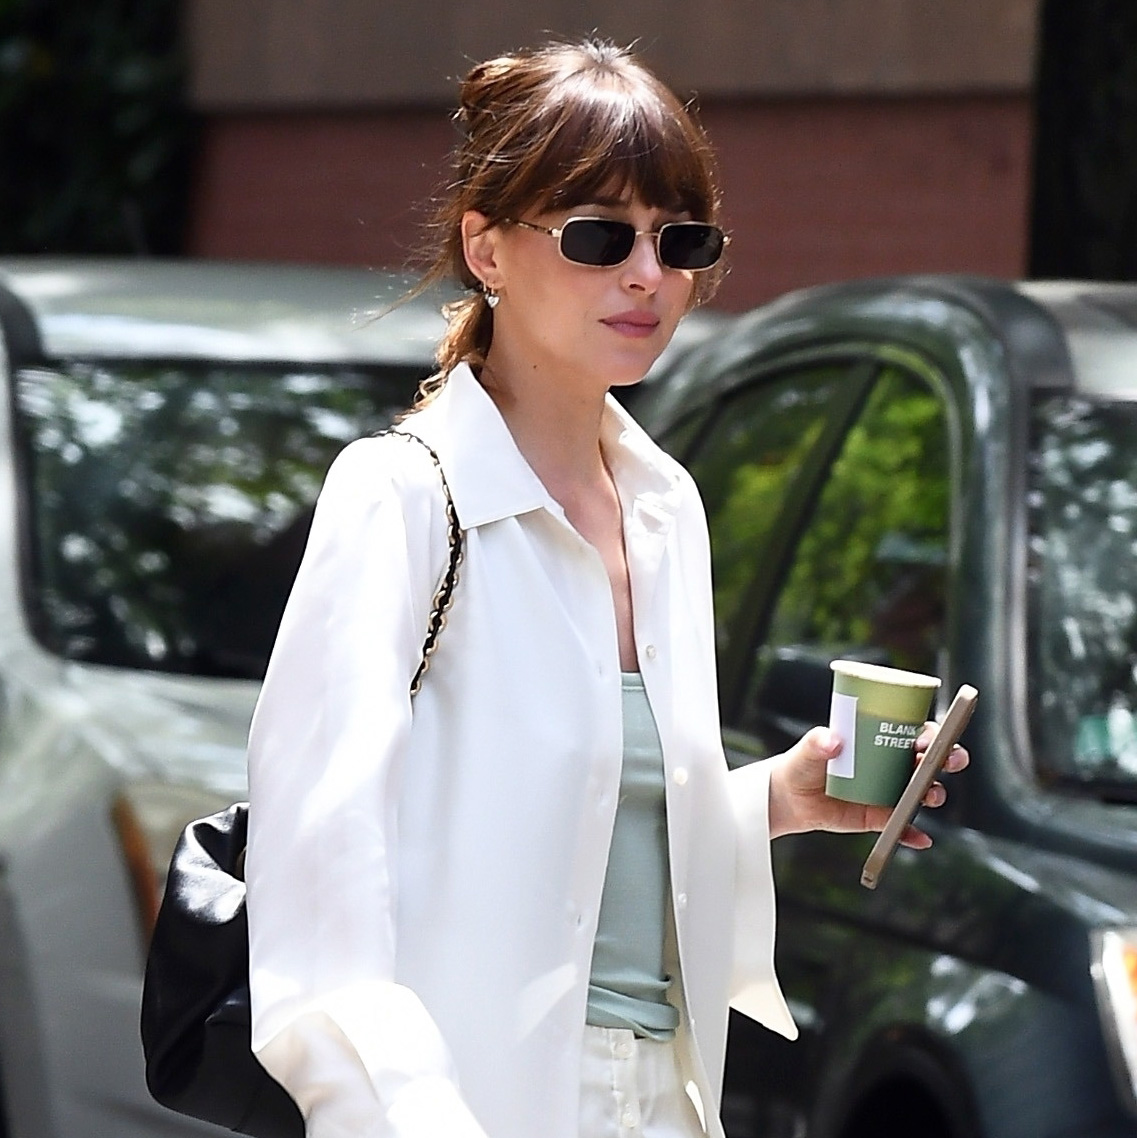 Dakota Johnson Wore the Un-Trendy Shoe Style Everyone Is Wearing With Skirts